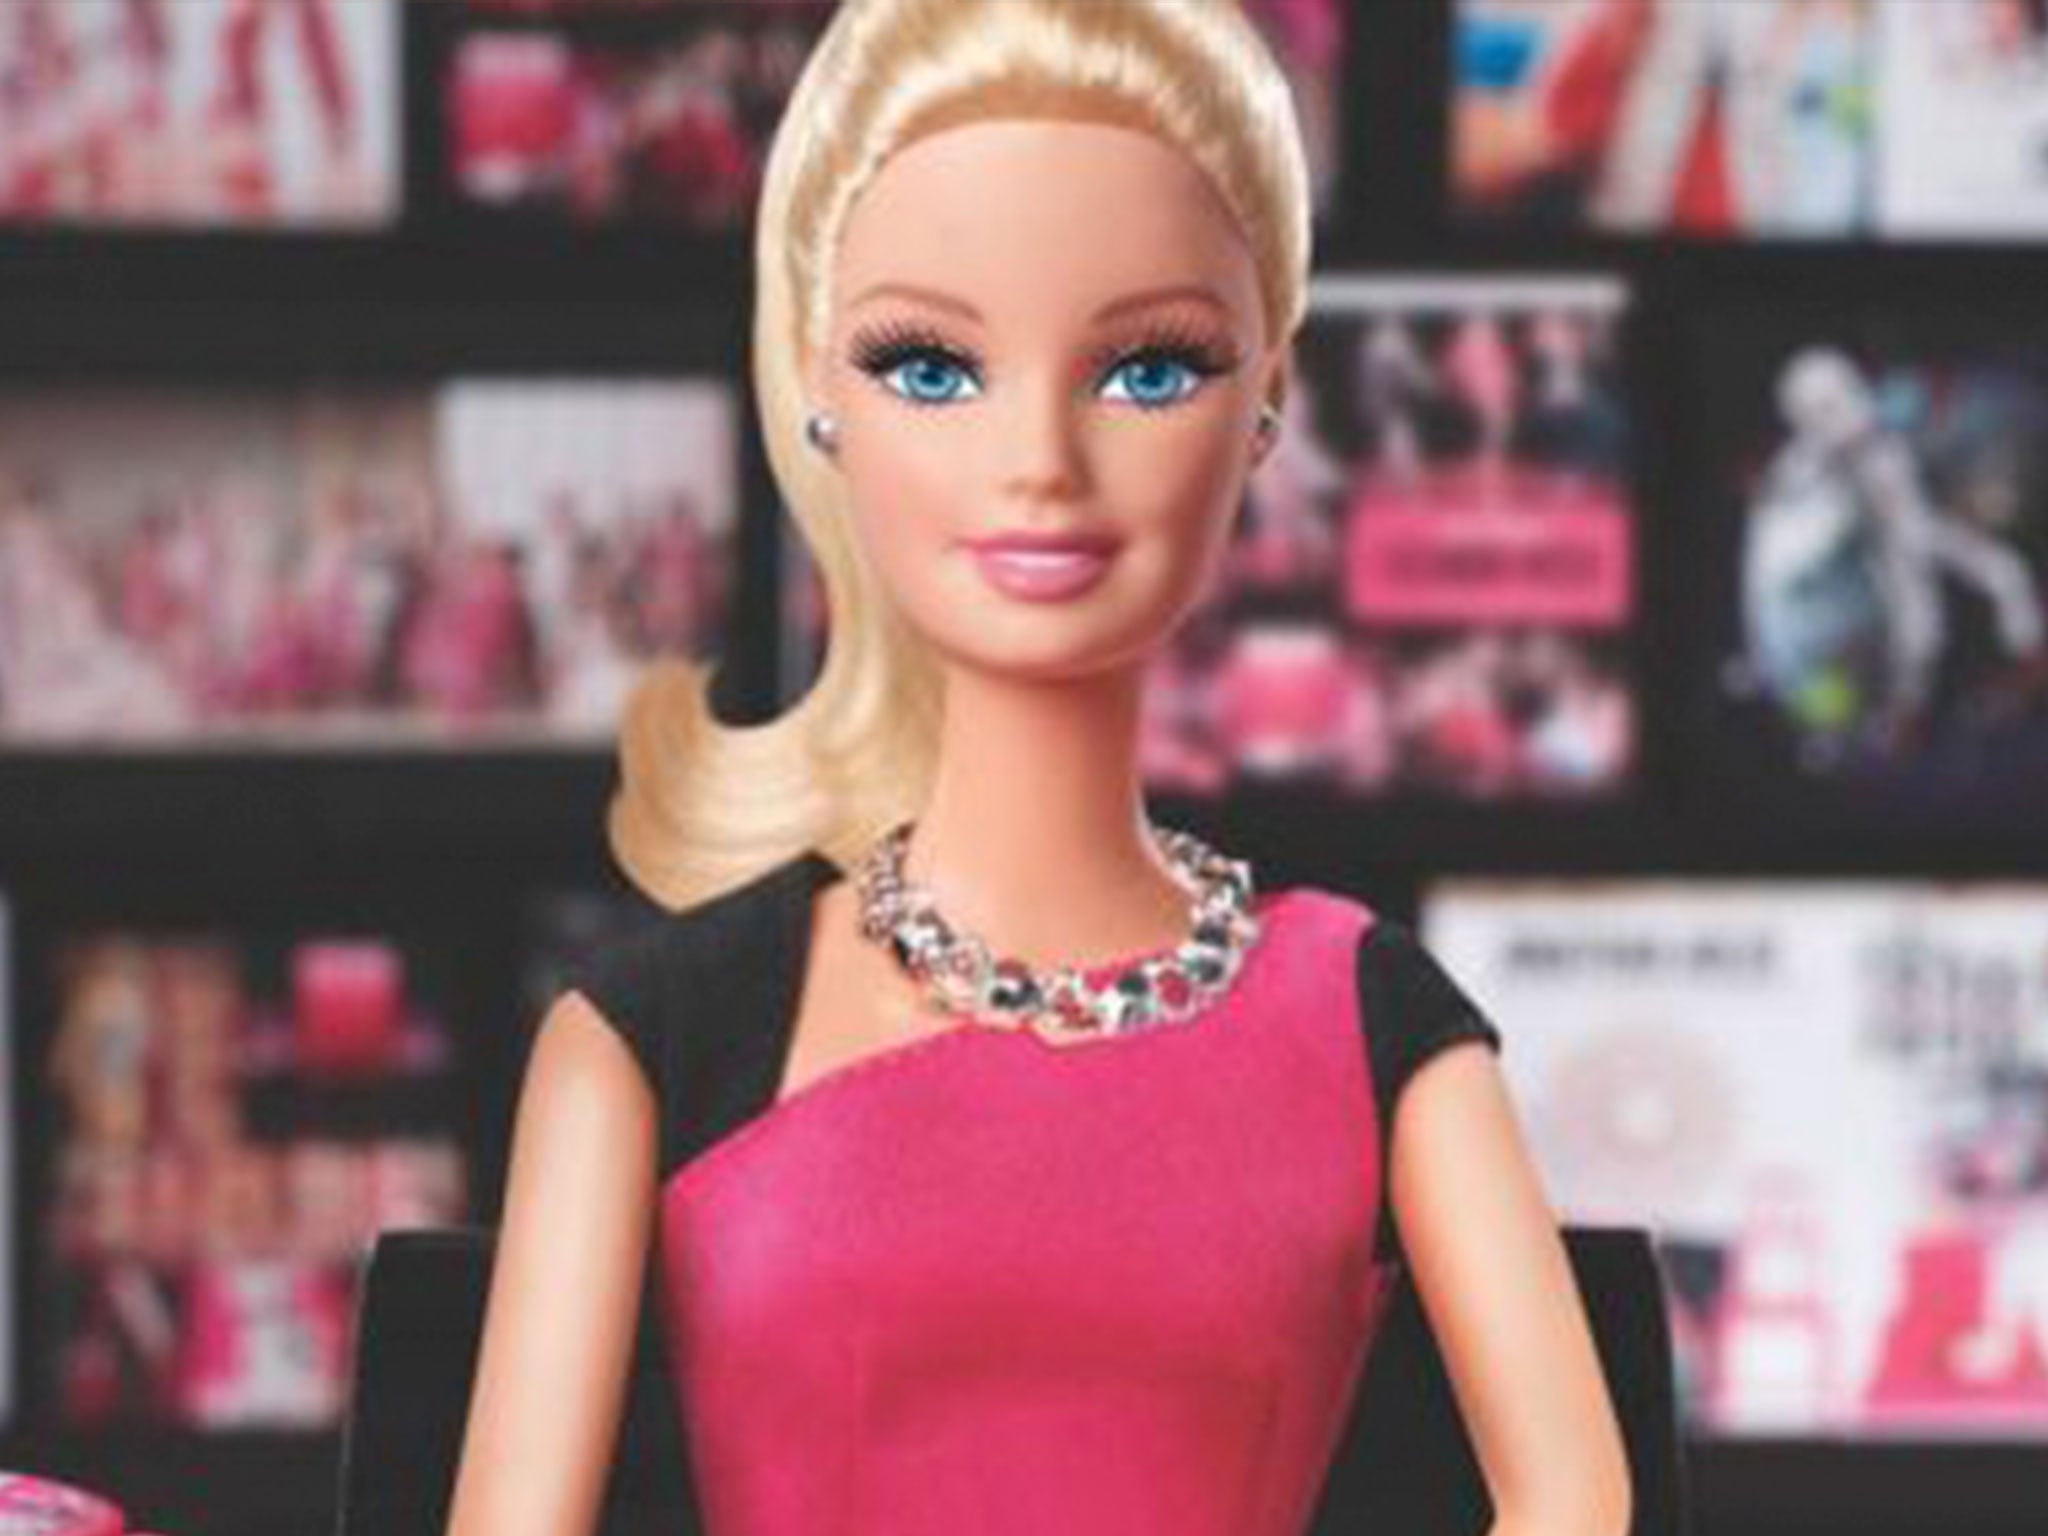 Barbie Means Business As Mattel Launches Entrepreneur Doll The Independent The Independent